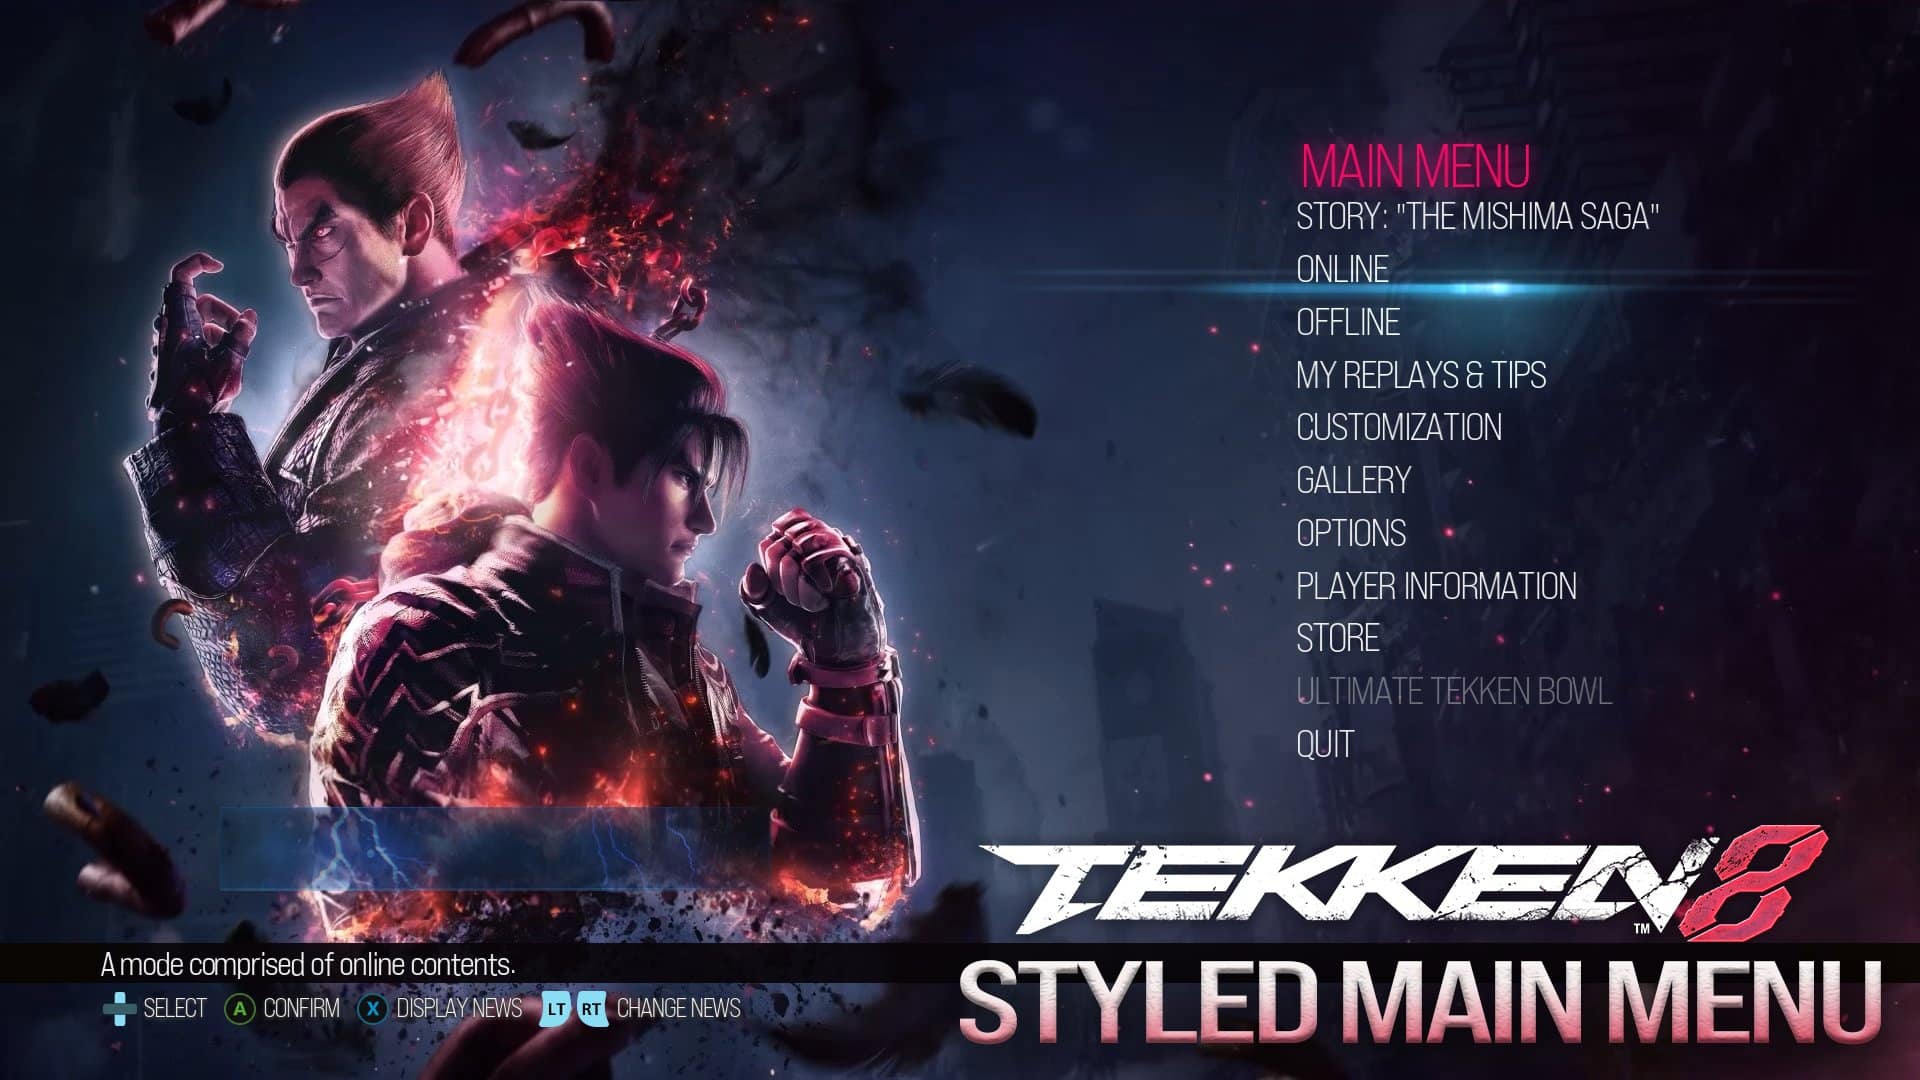 Main menu of Tekken 8, featuring customization options among other modes, with dynamic artwork of key characters from the game.